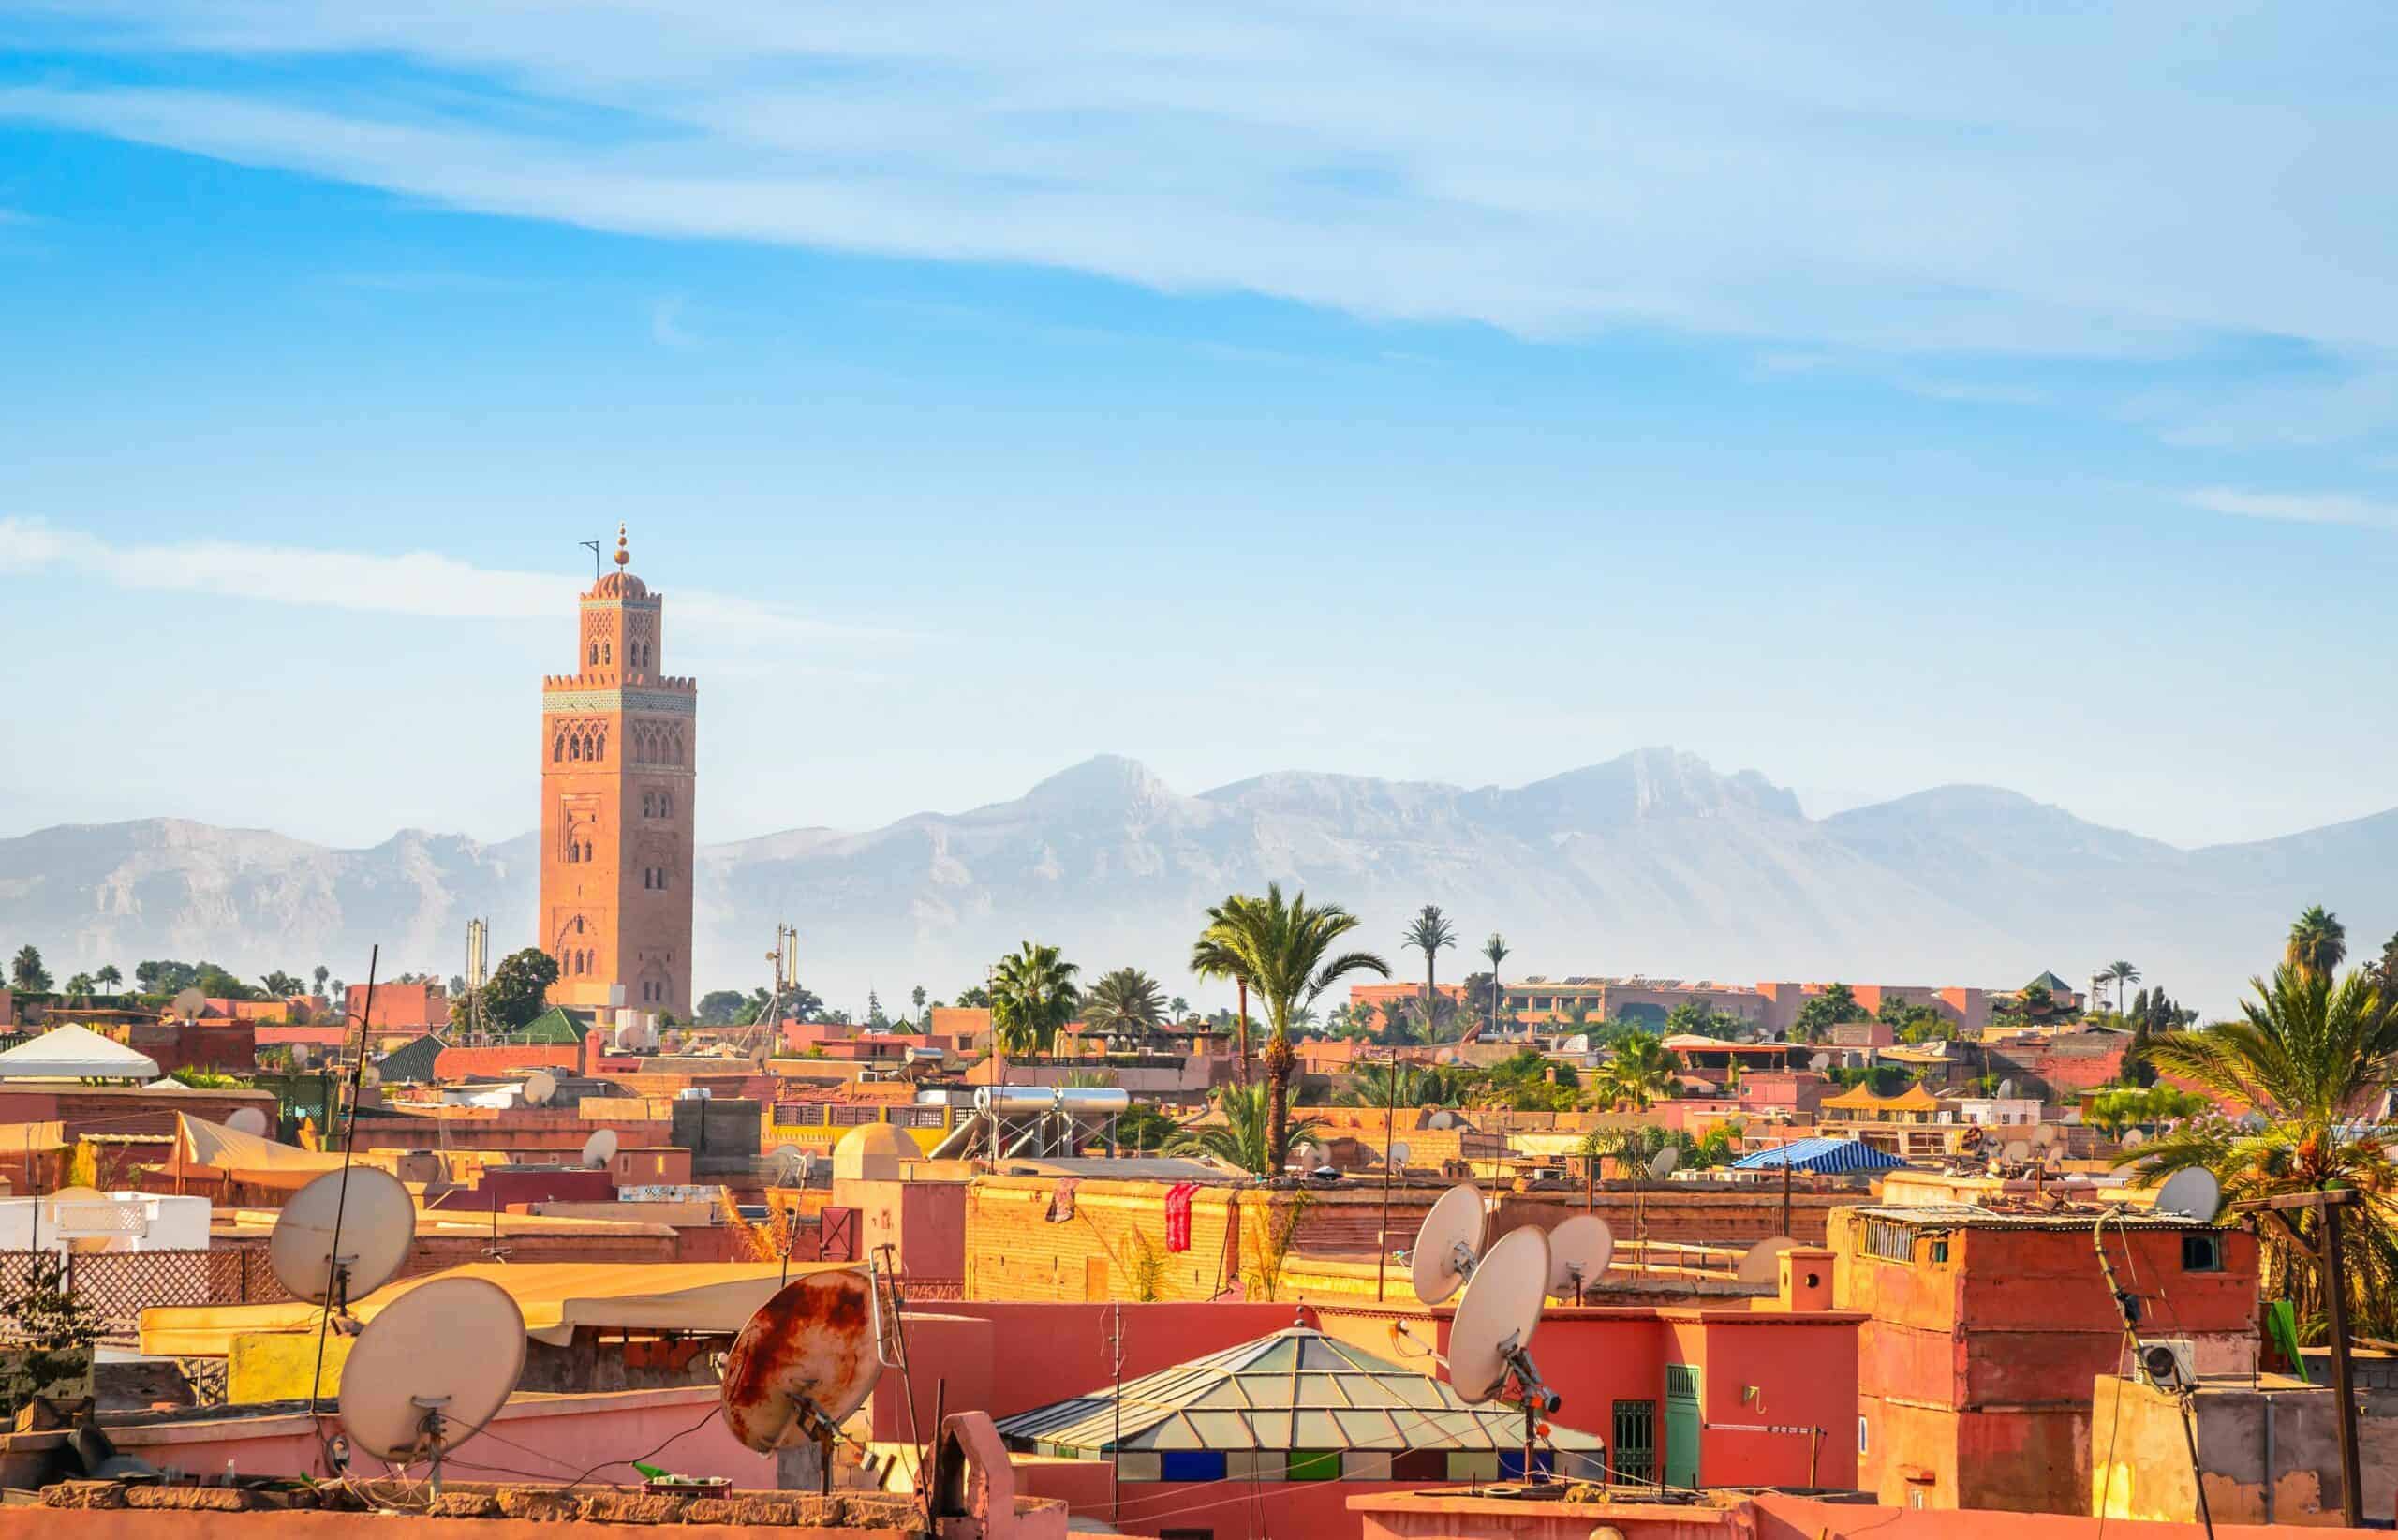 Landscape view of Marrakech, Morocco with mountains in the background.